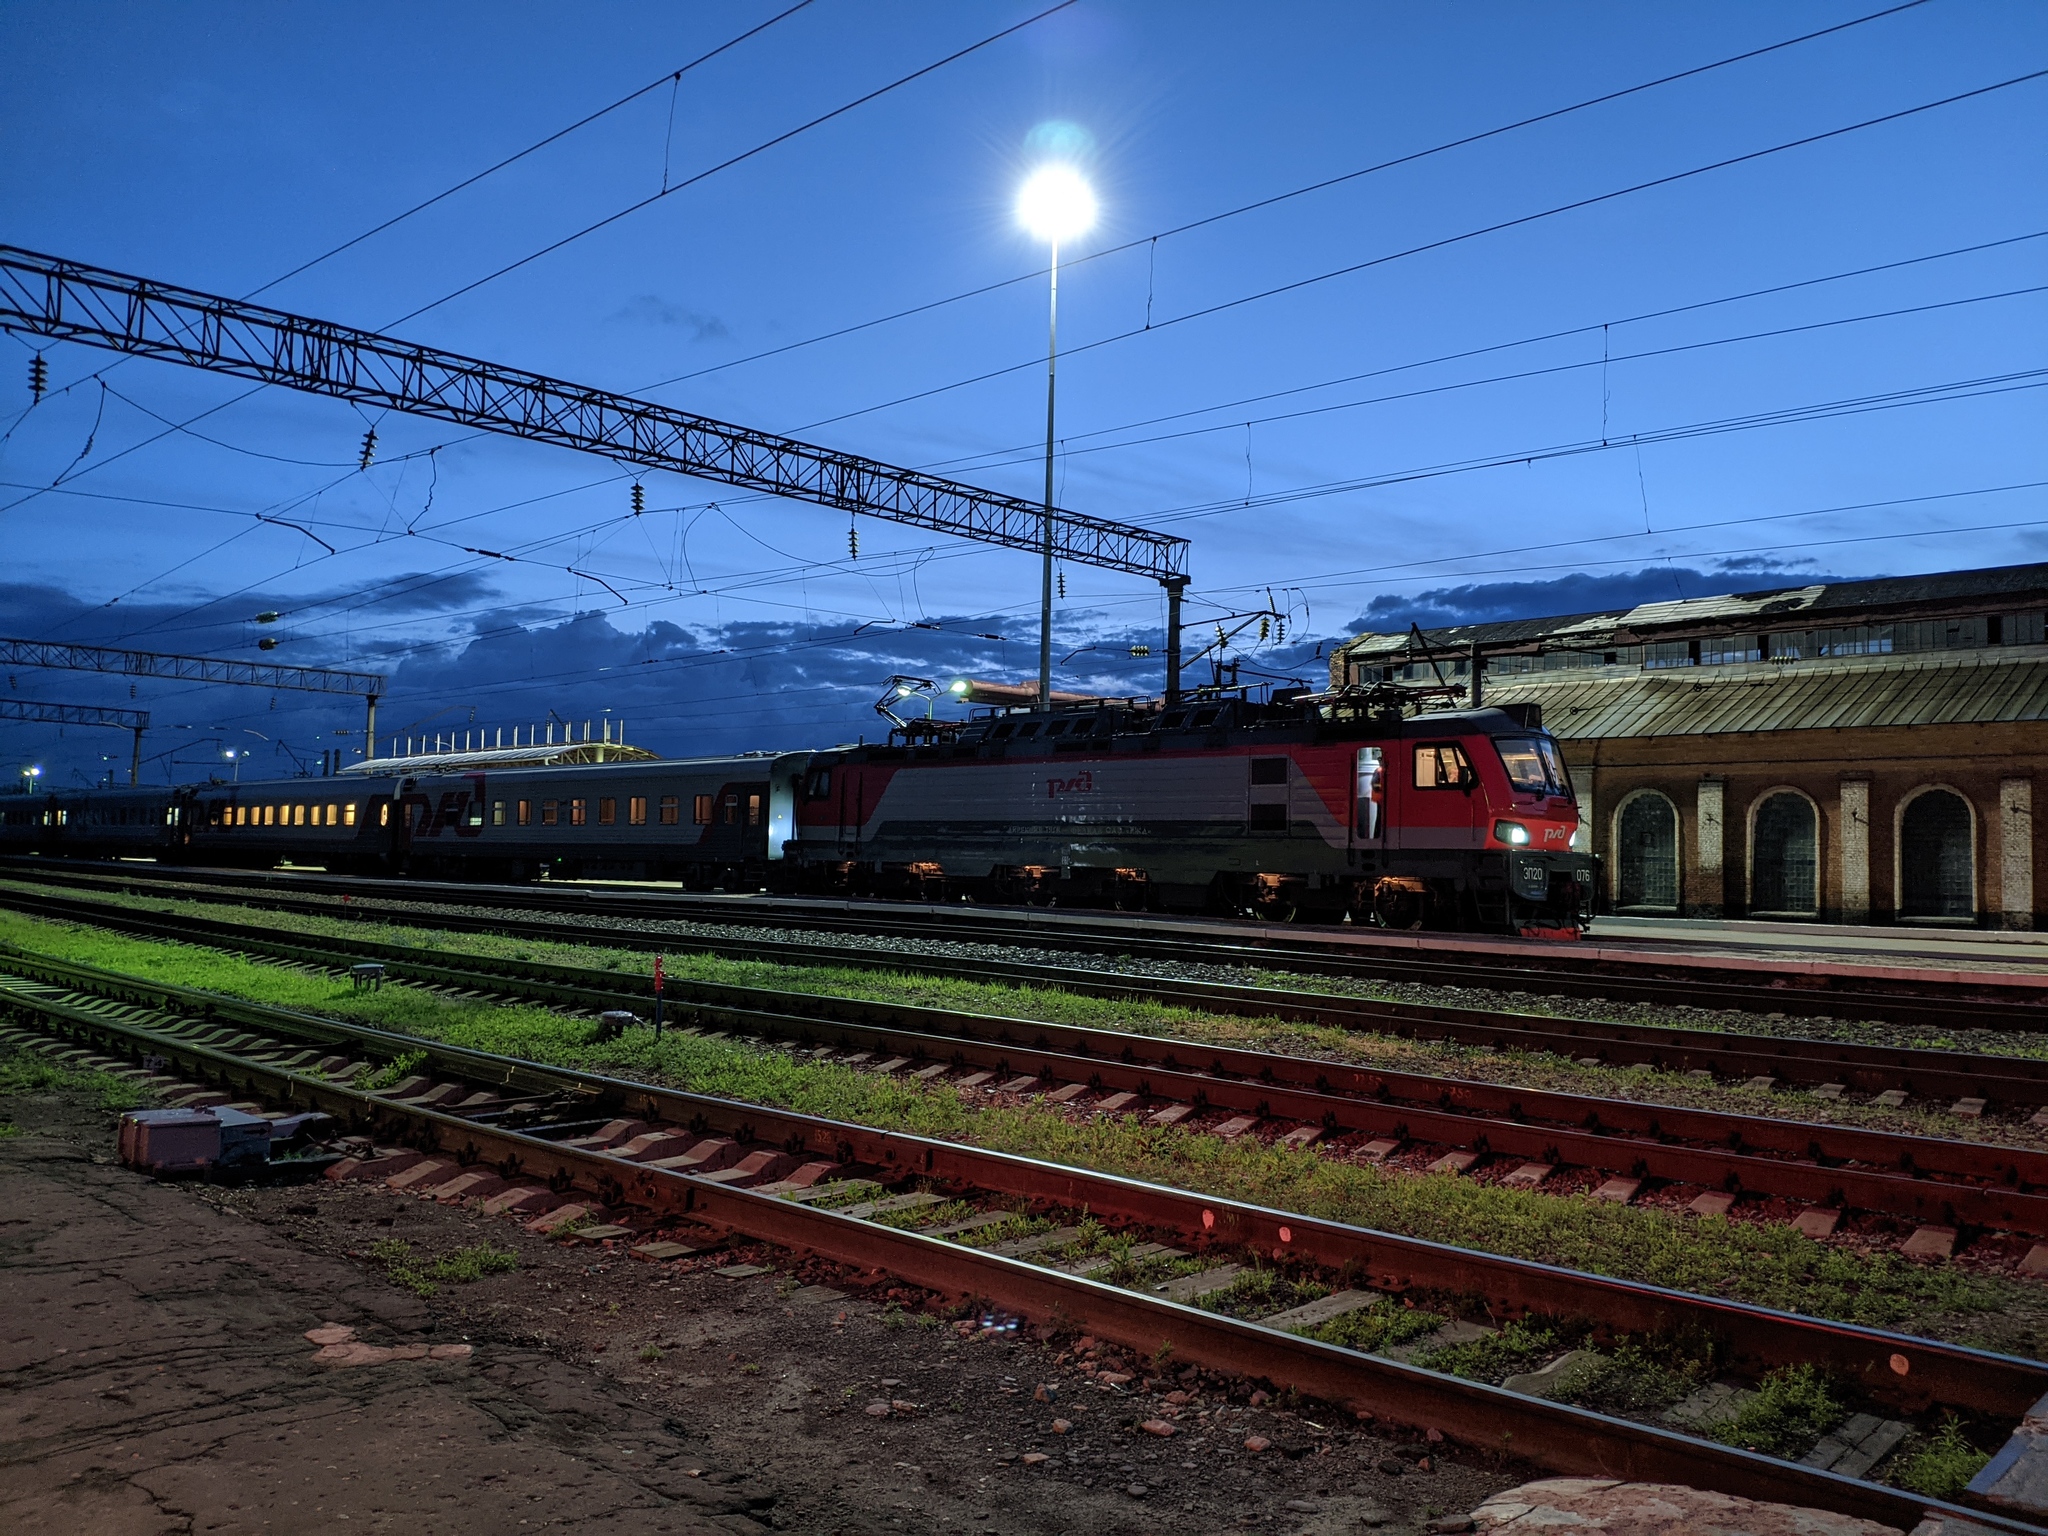 EP20-076 with a passenger train at Michurinsk-Voronezhsky station - My, Railway, A train, Michurinsk, The photo